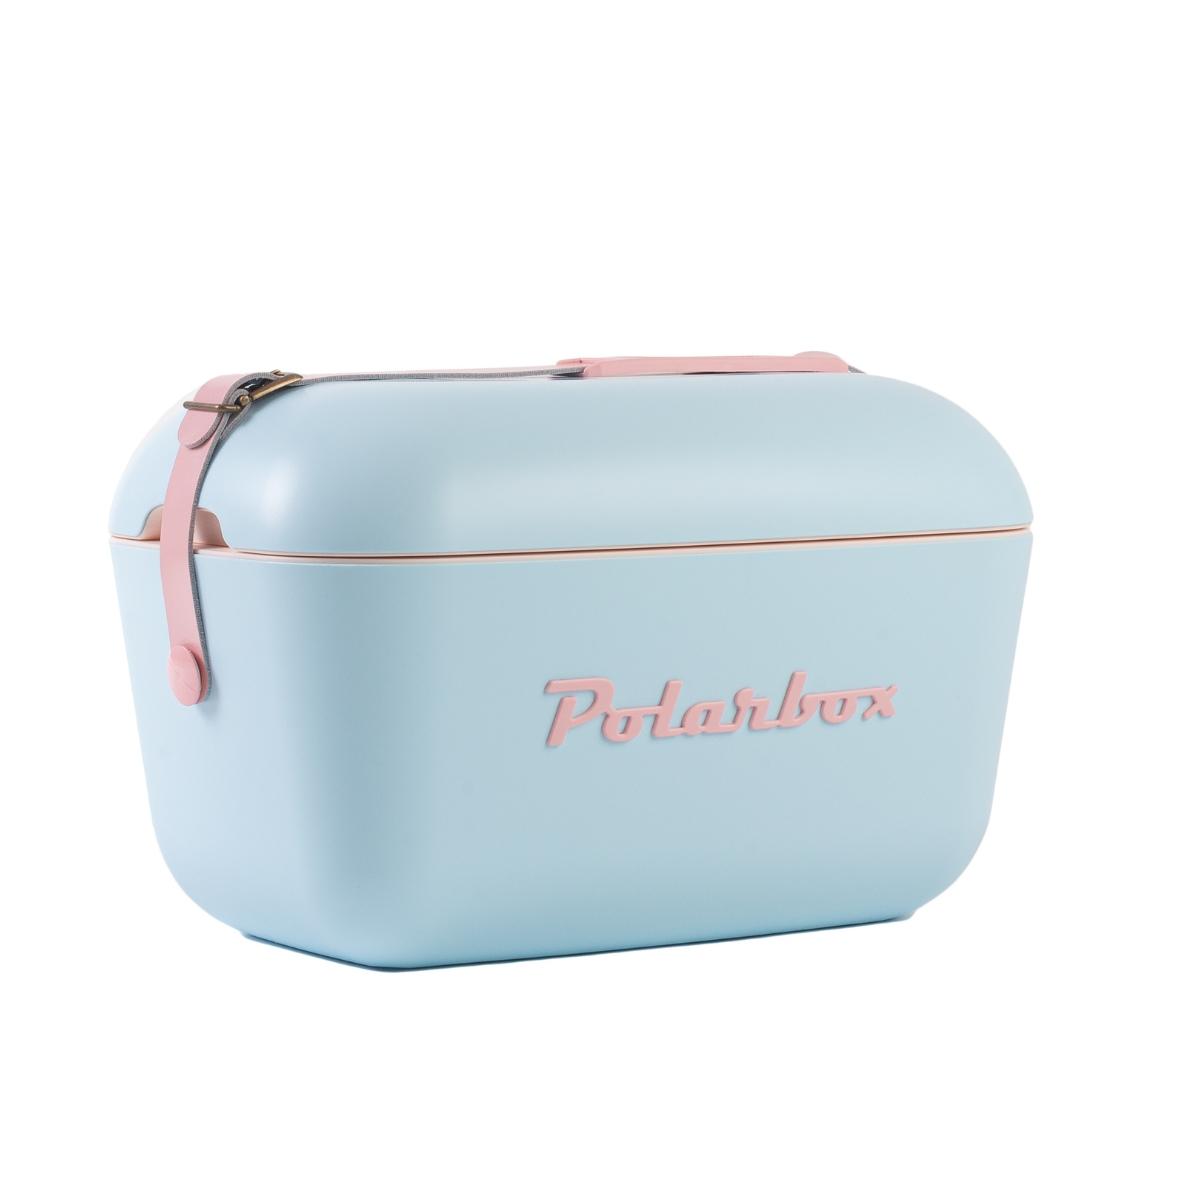 Polarbox 20 Liters Pop Cooler Box Sky Blue - Baby Rose Baby Rose Blue PP PS